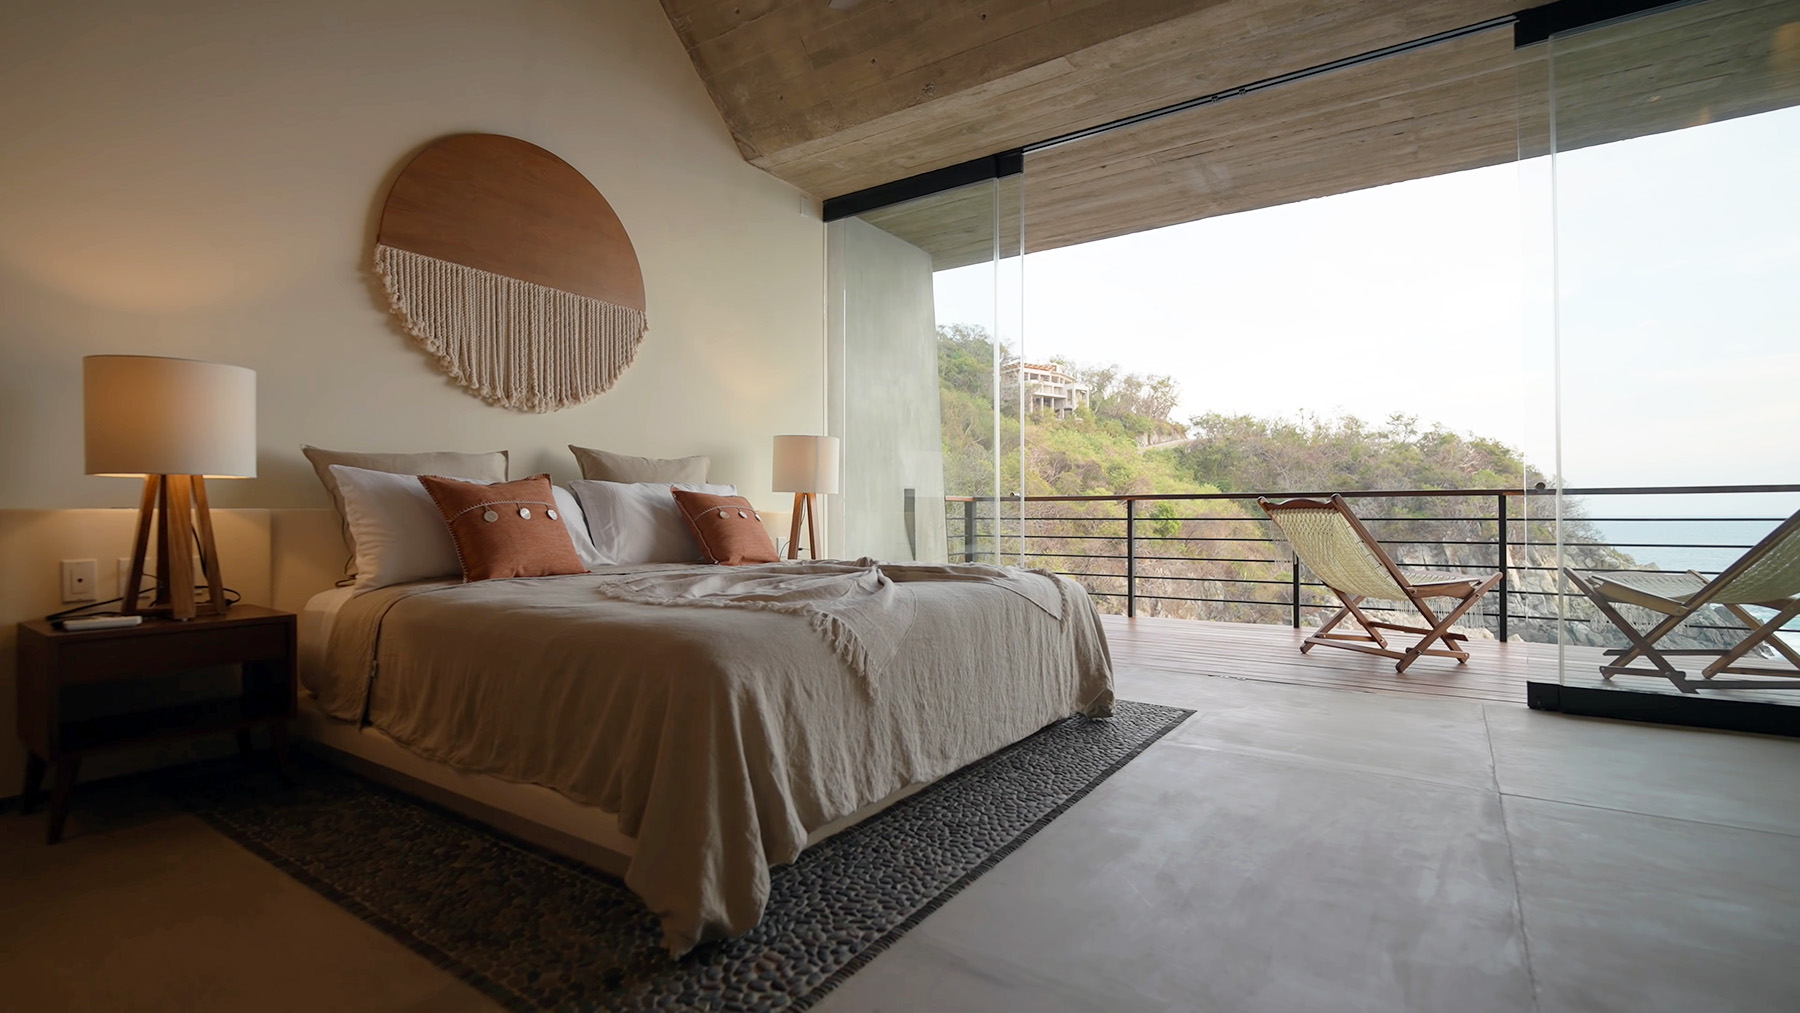 board formed concrete on a bedroom ceiling extending to the exterior balcony roof.